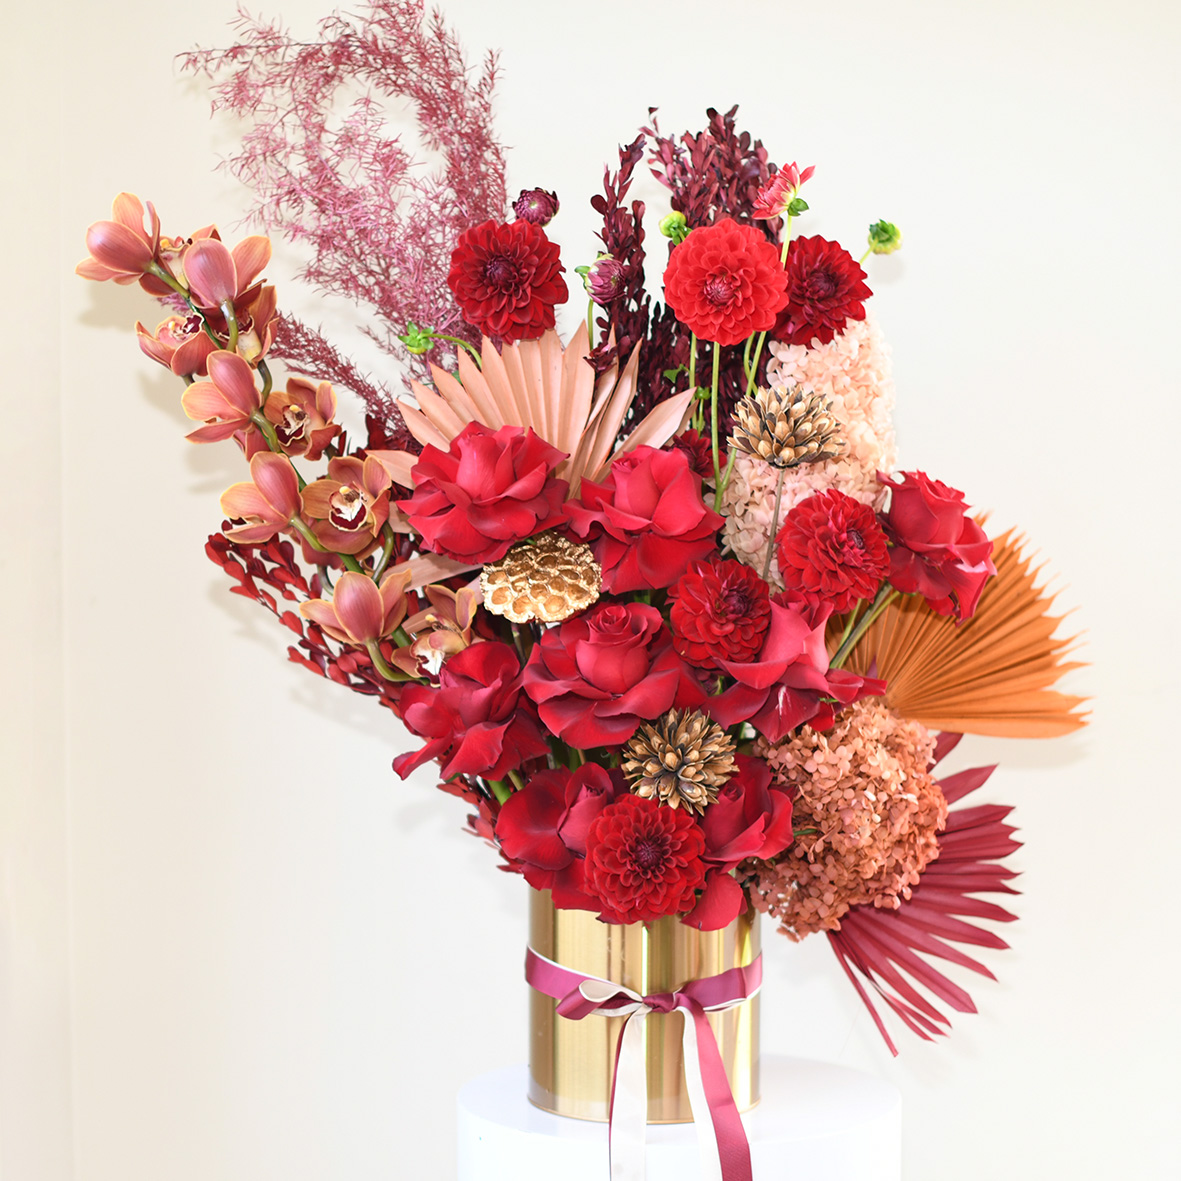 Statement Flowers Sydney Delivery for Valentine's Day